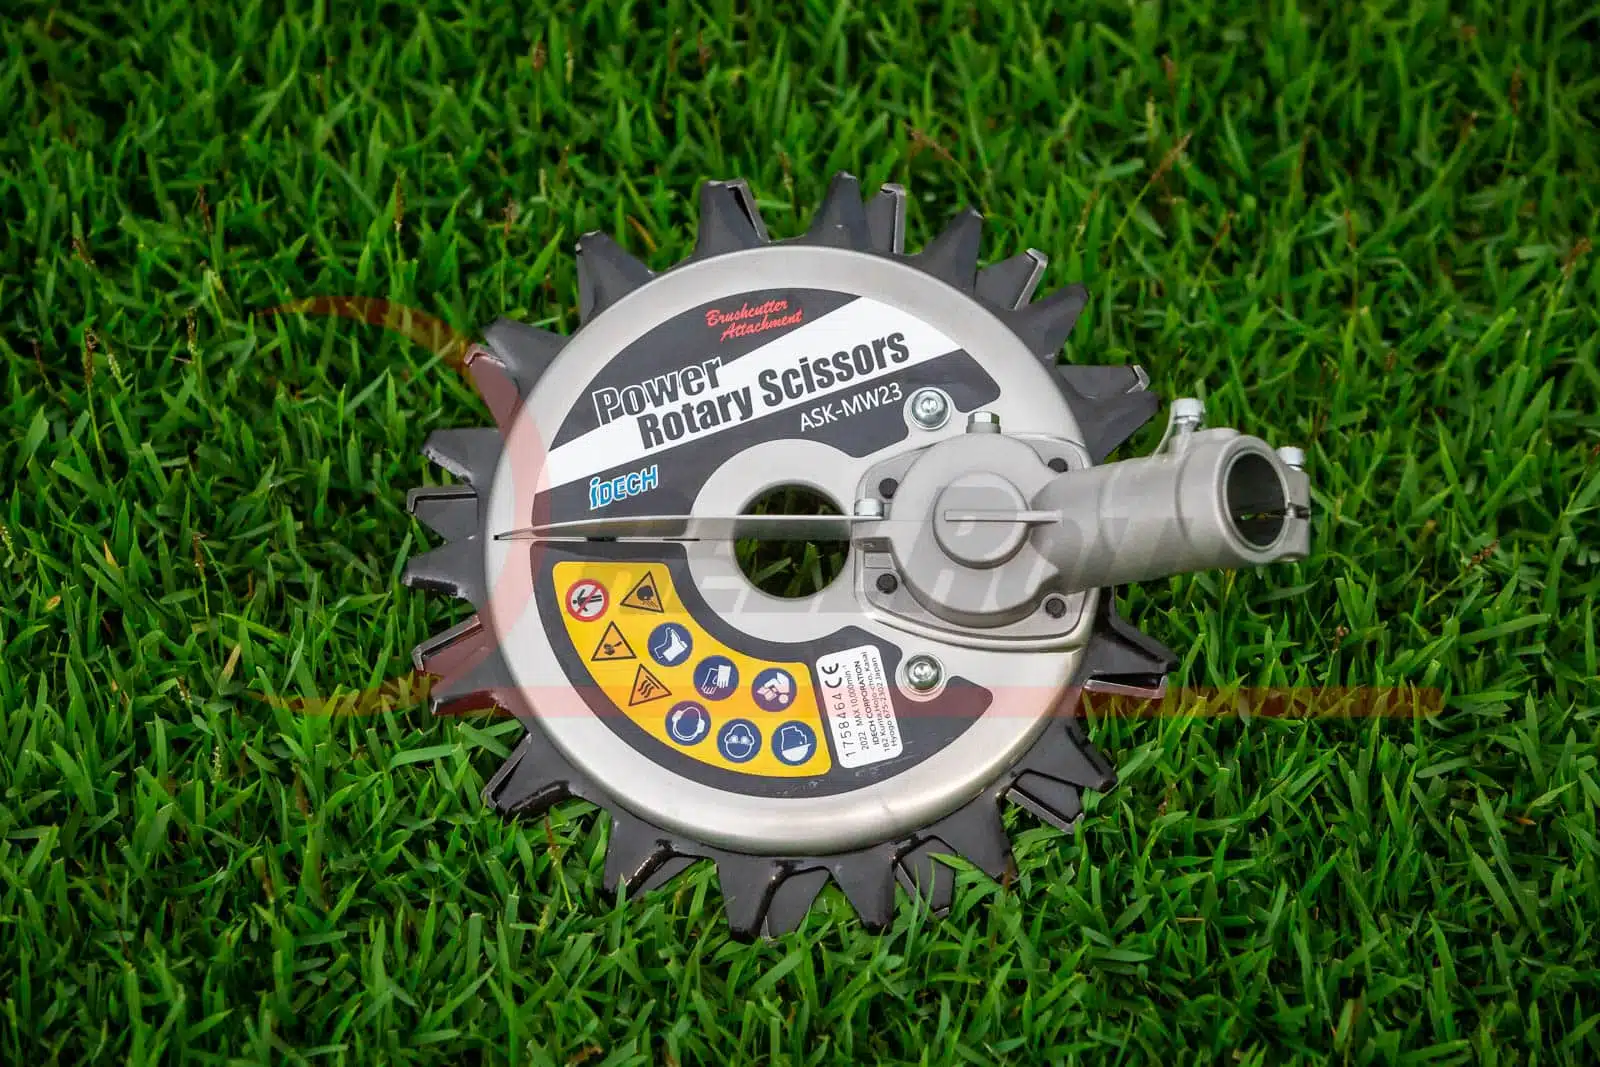 IDECH Rotary Scissors  Accurate Lawn Trimming